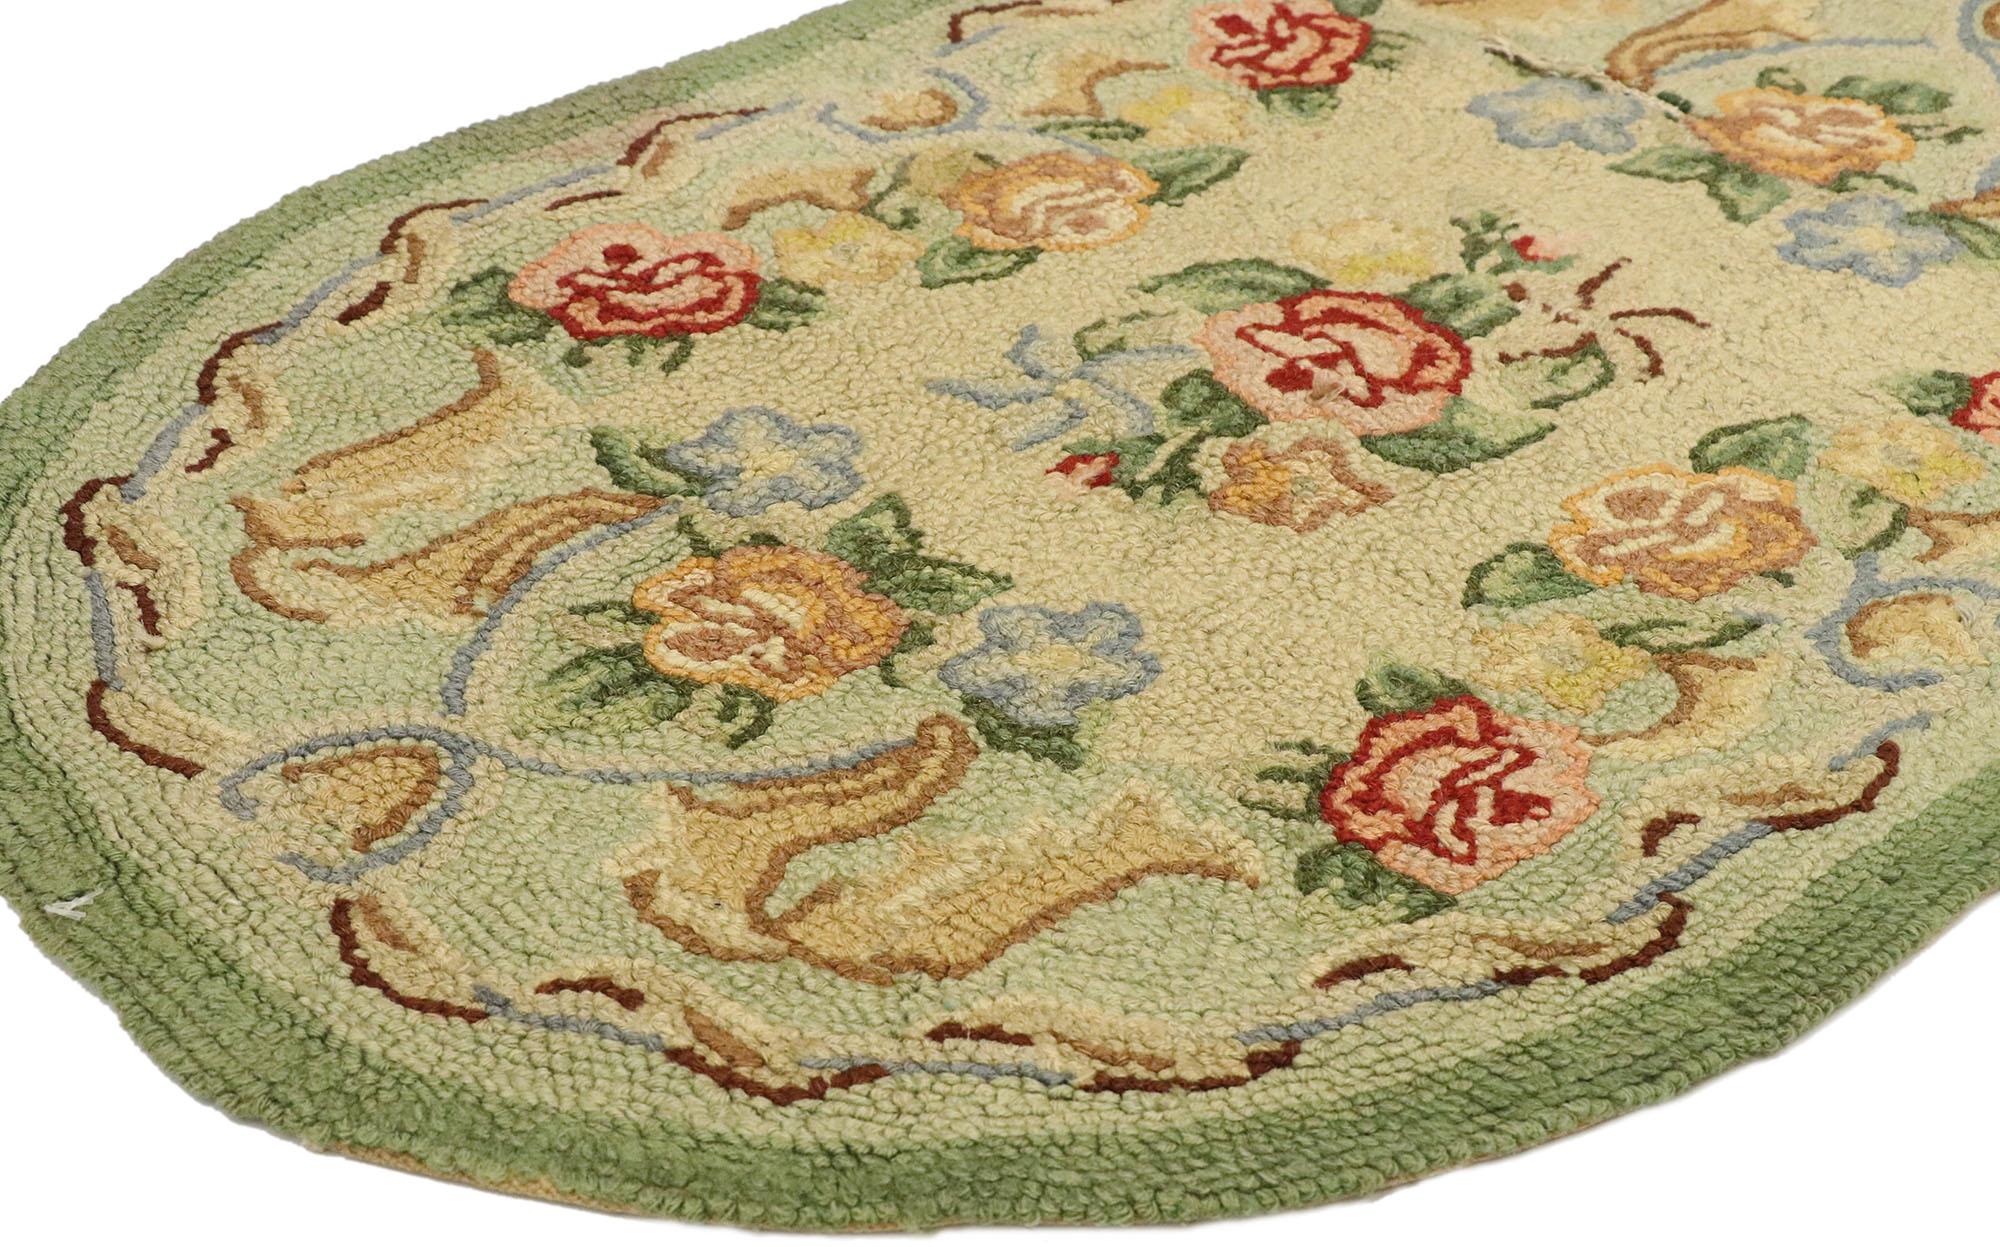 71006 Antique Chinese Aubusson Floral Hooked Rug, 02'00 X 02'11. Antique Chinese floral hooked rugs with Aubusson design are captivating decorative pieces that blend traditional Chinese artistry with the sophisticated elegance of the renowned French